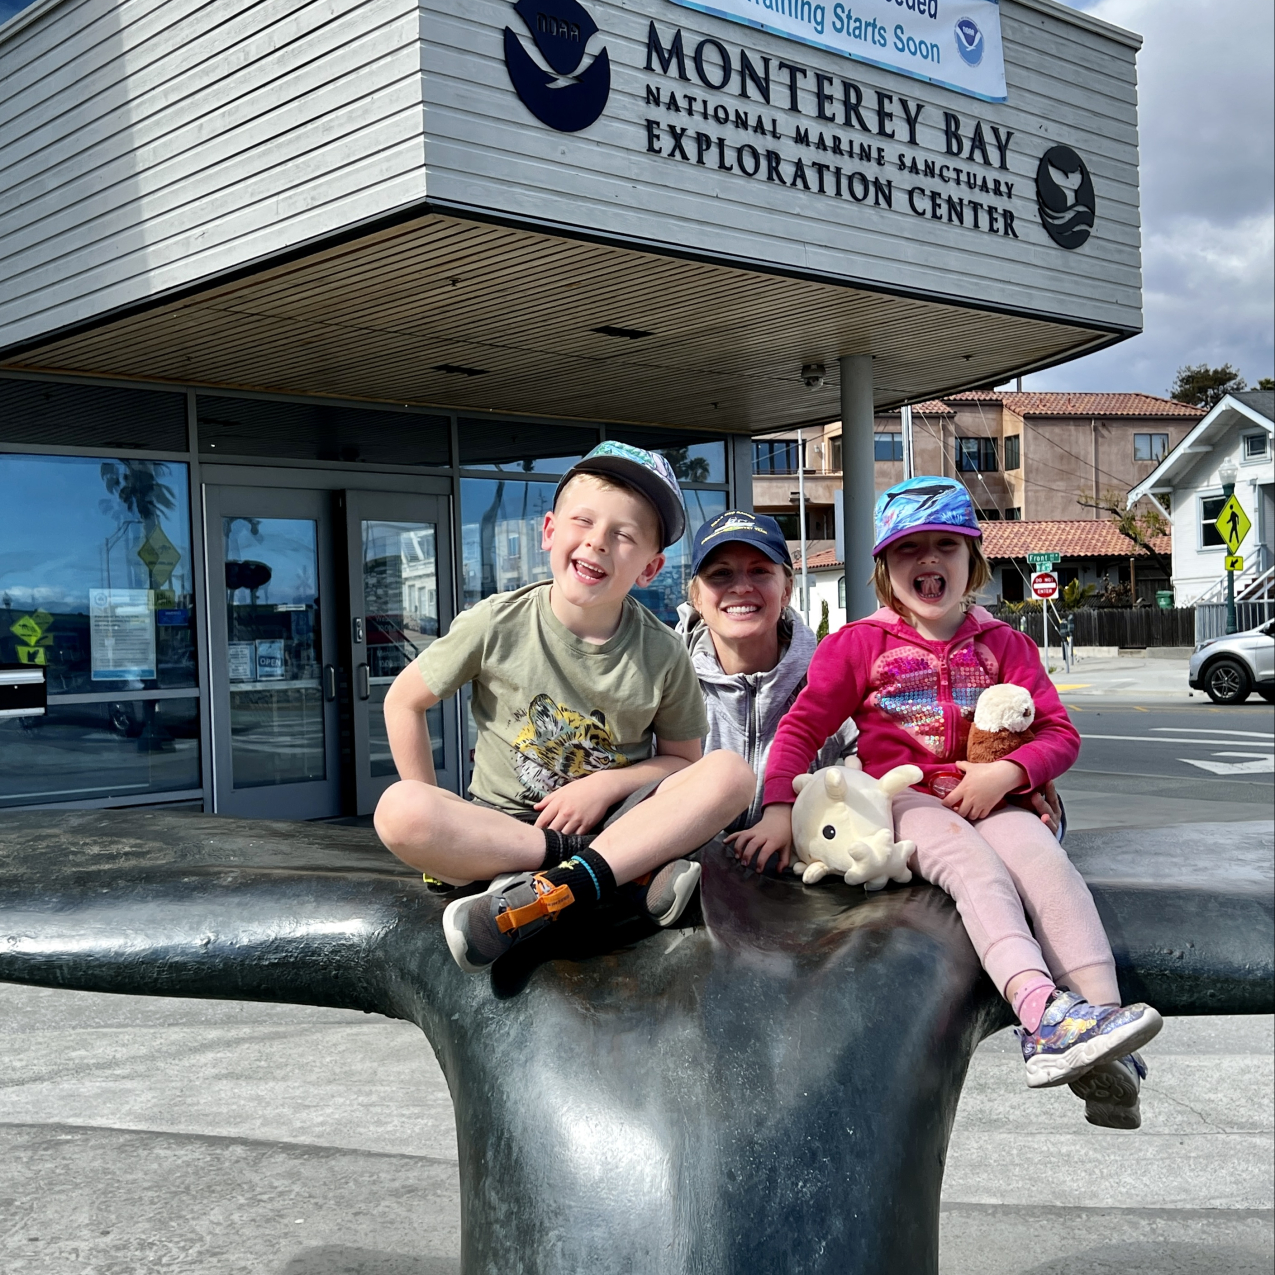 Two children wearing baseball caps sit and pose on a sculpture of a whale’s tale outside in front of a building with a sign that reads “Monterey Bay National Marine Sanctuary Exploration Center.” The child on the right is holding two stuffed animals. An adult wearing a baseball cap stands posing behind them.  